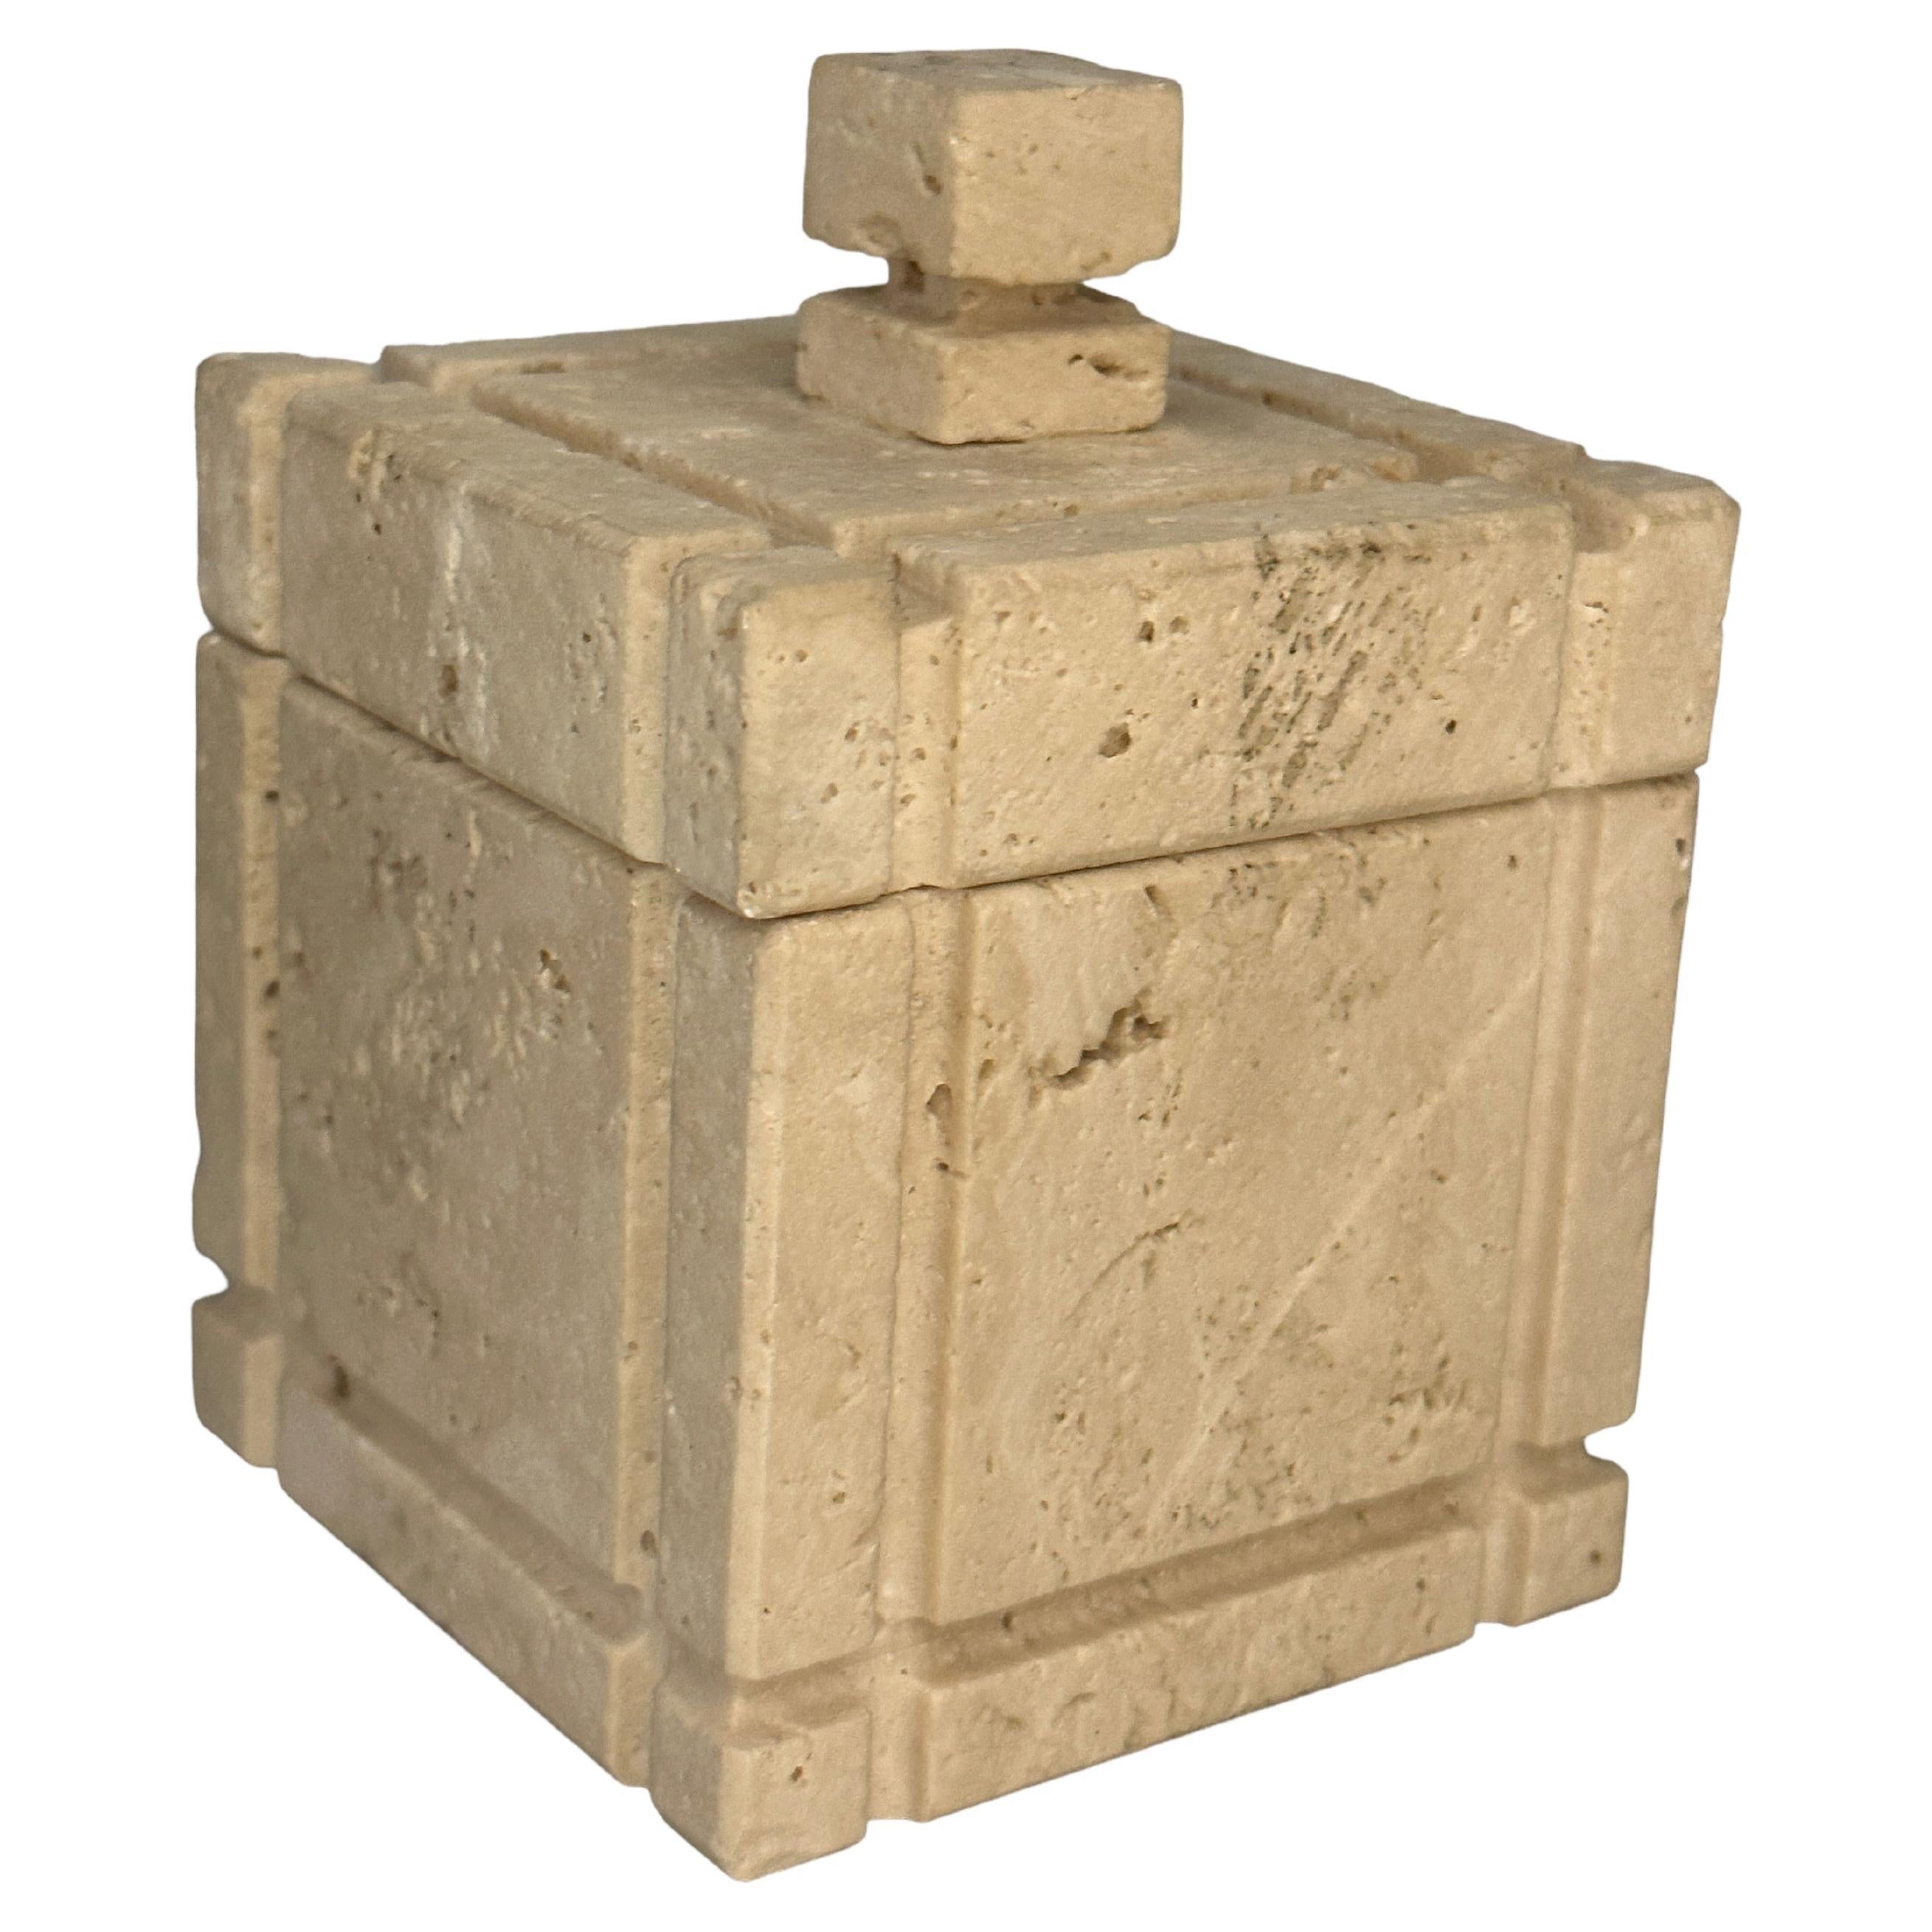 Midcentury Travertine Marble Italian Box Catchall by Fratelli Manelli, 1970s For Sale